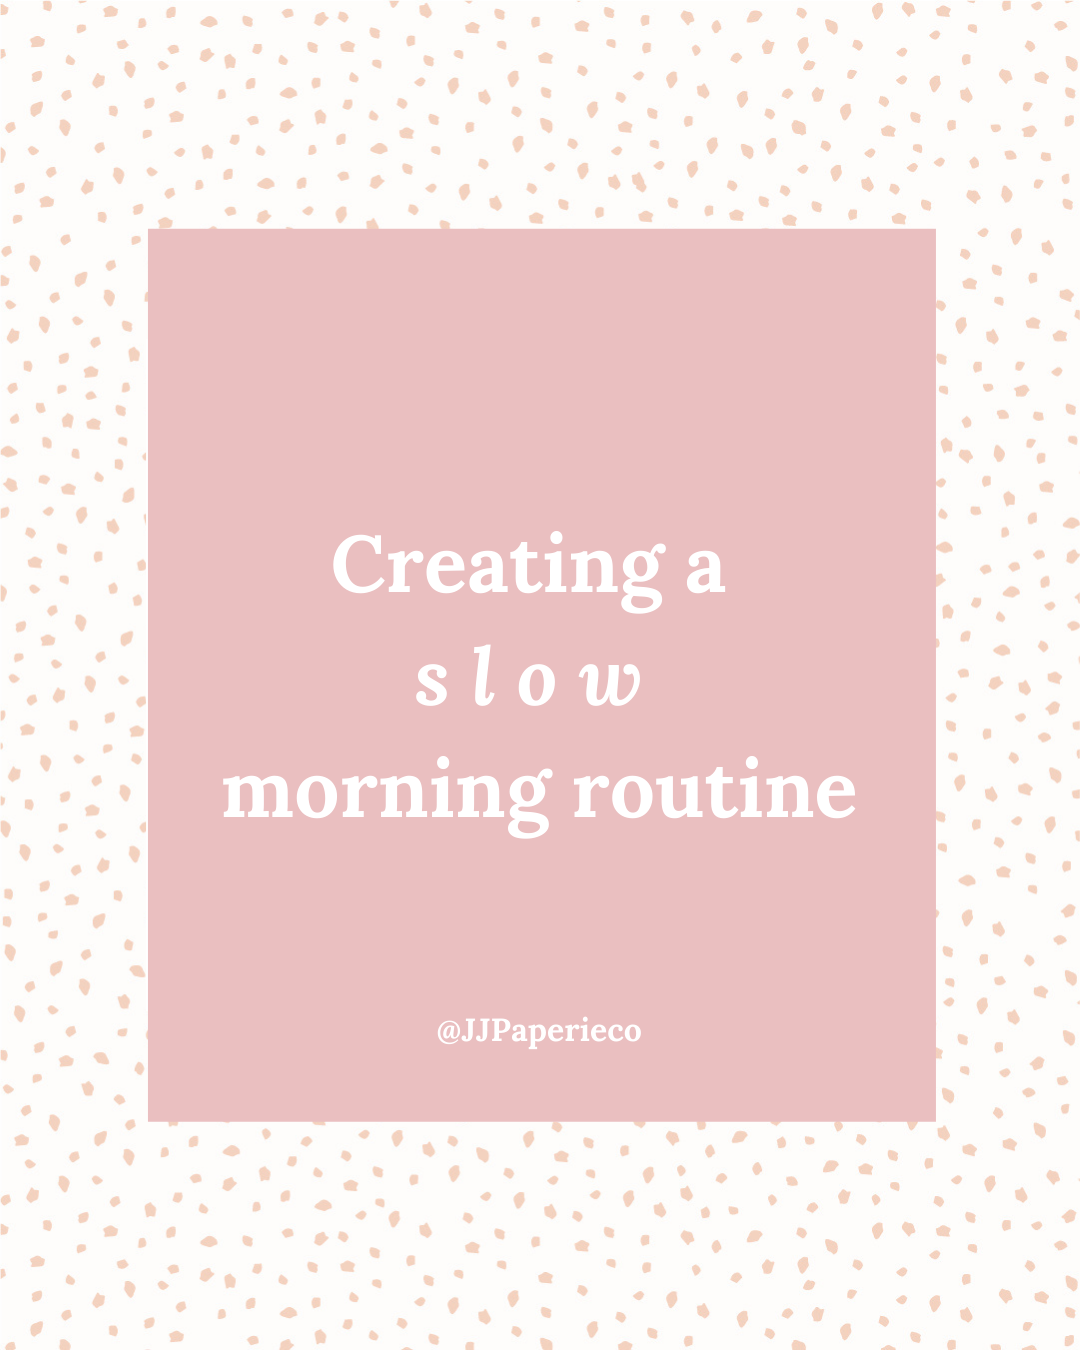 How to Create a Morning Routine